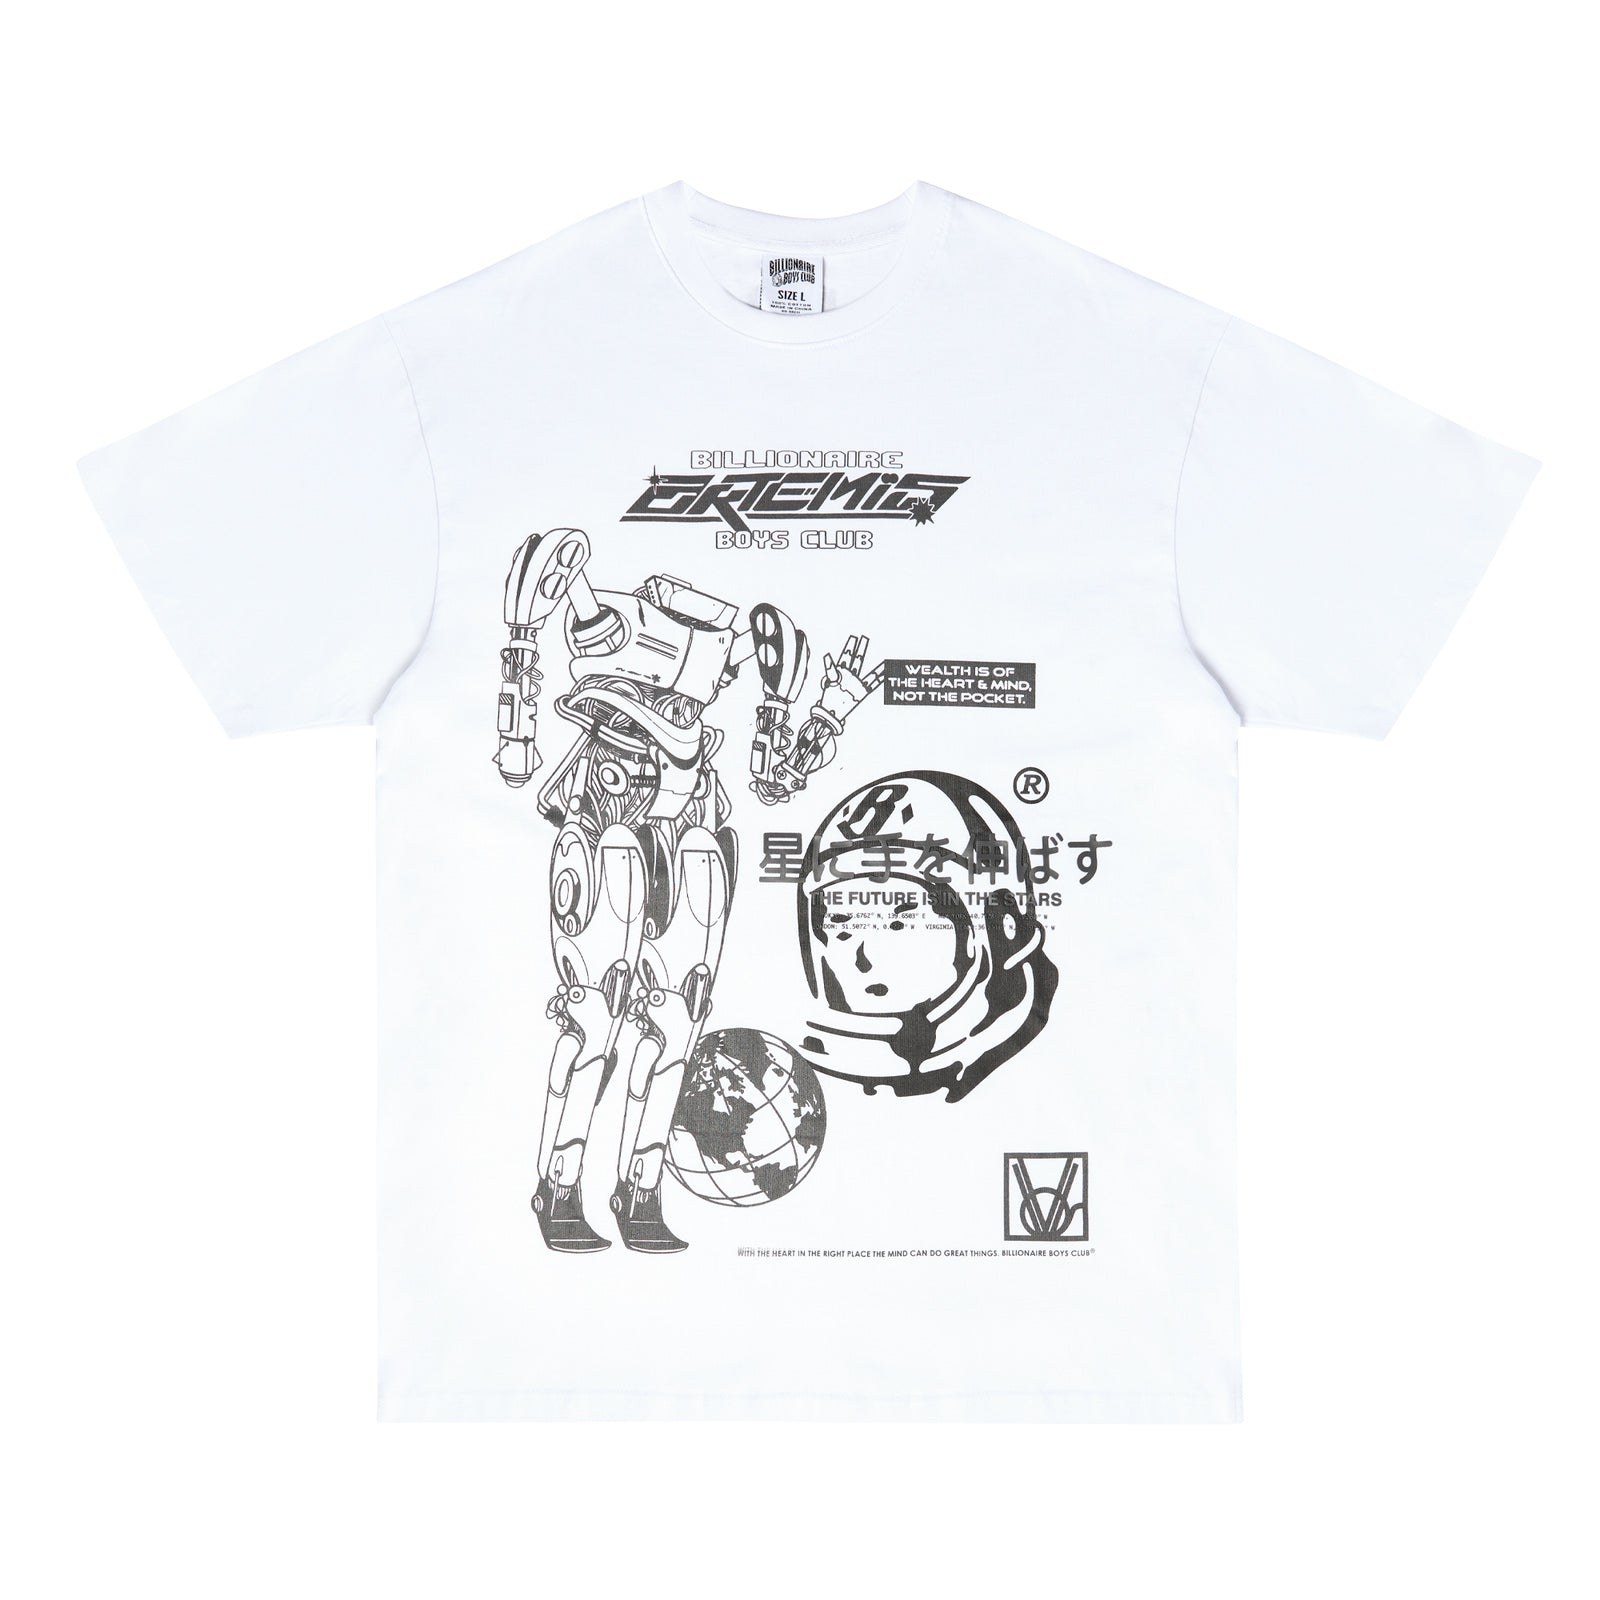 Casio G-Shock Master of G - Land Black GW9500TLC-1 Men BB Peace SS Tee White (Oversized Fit) - T-SHIRTS Canada